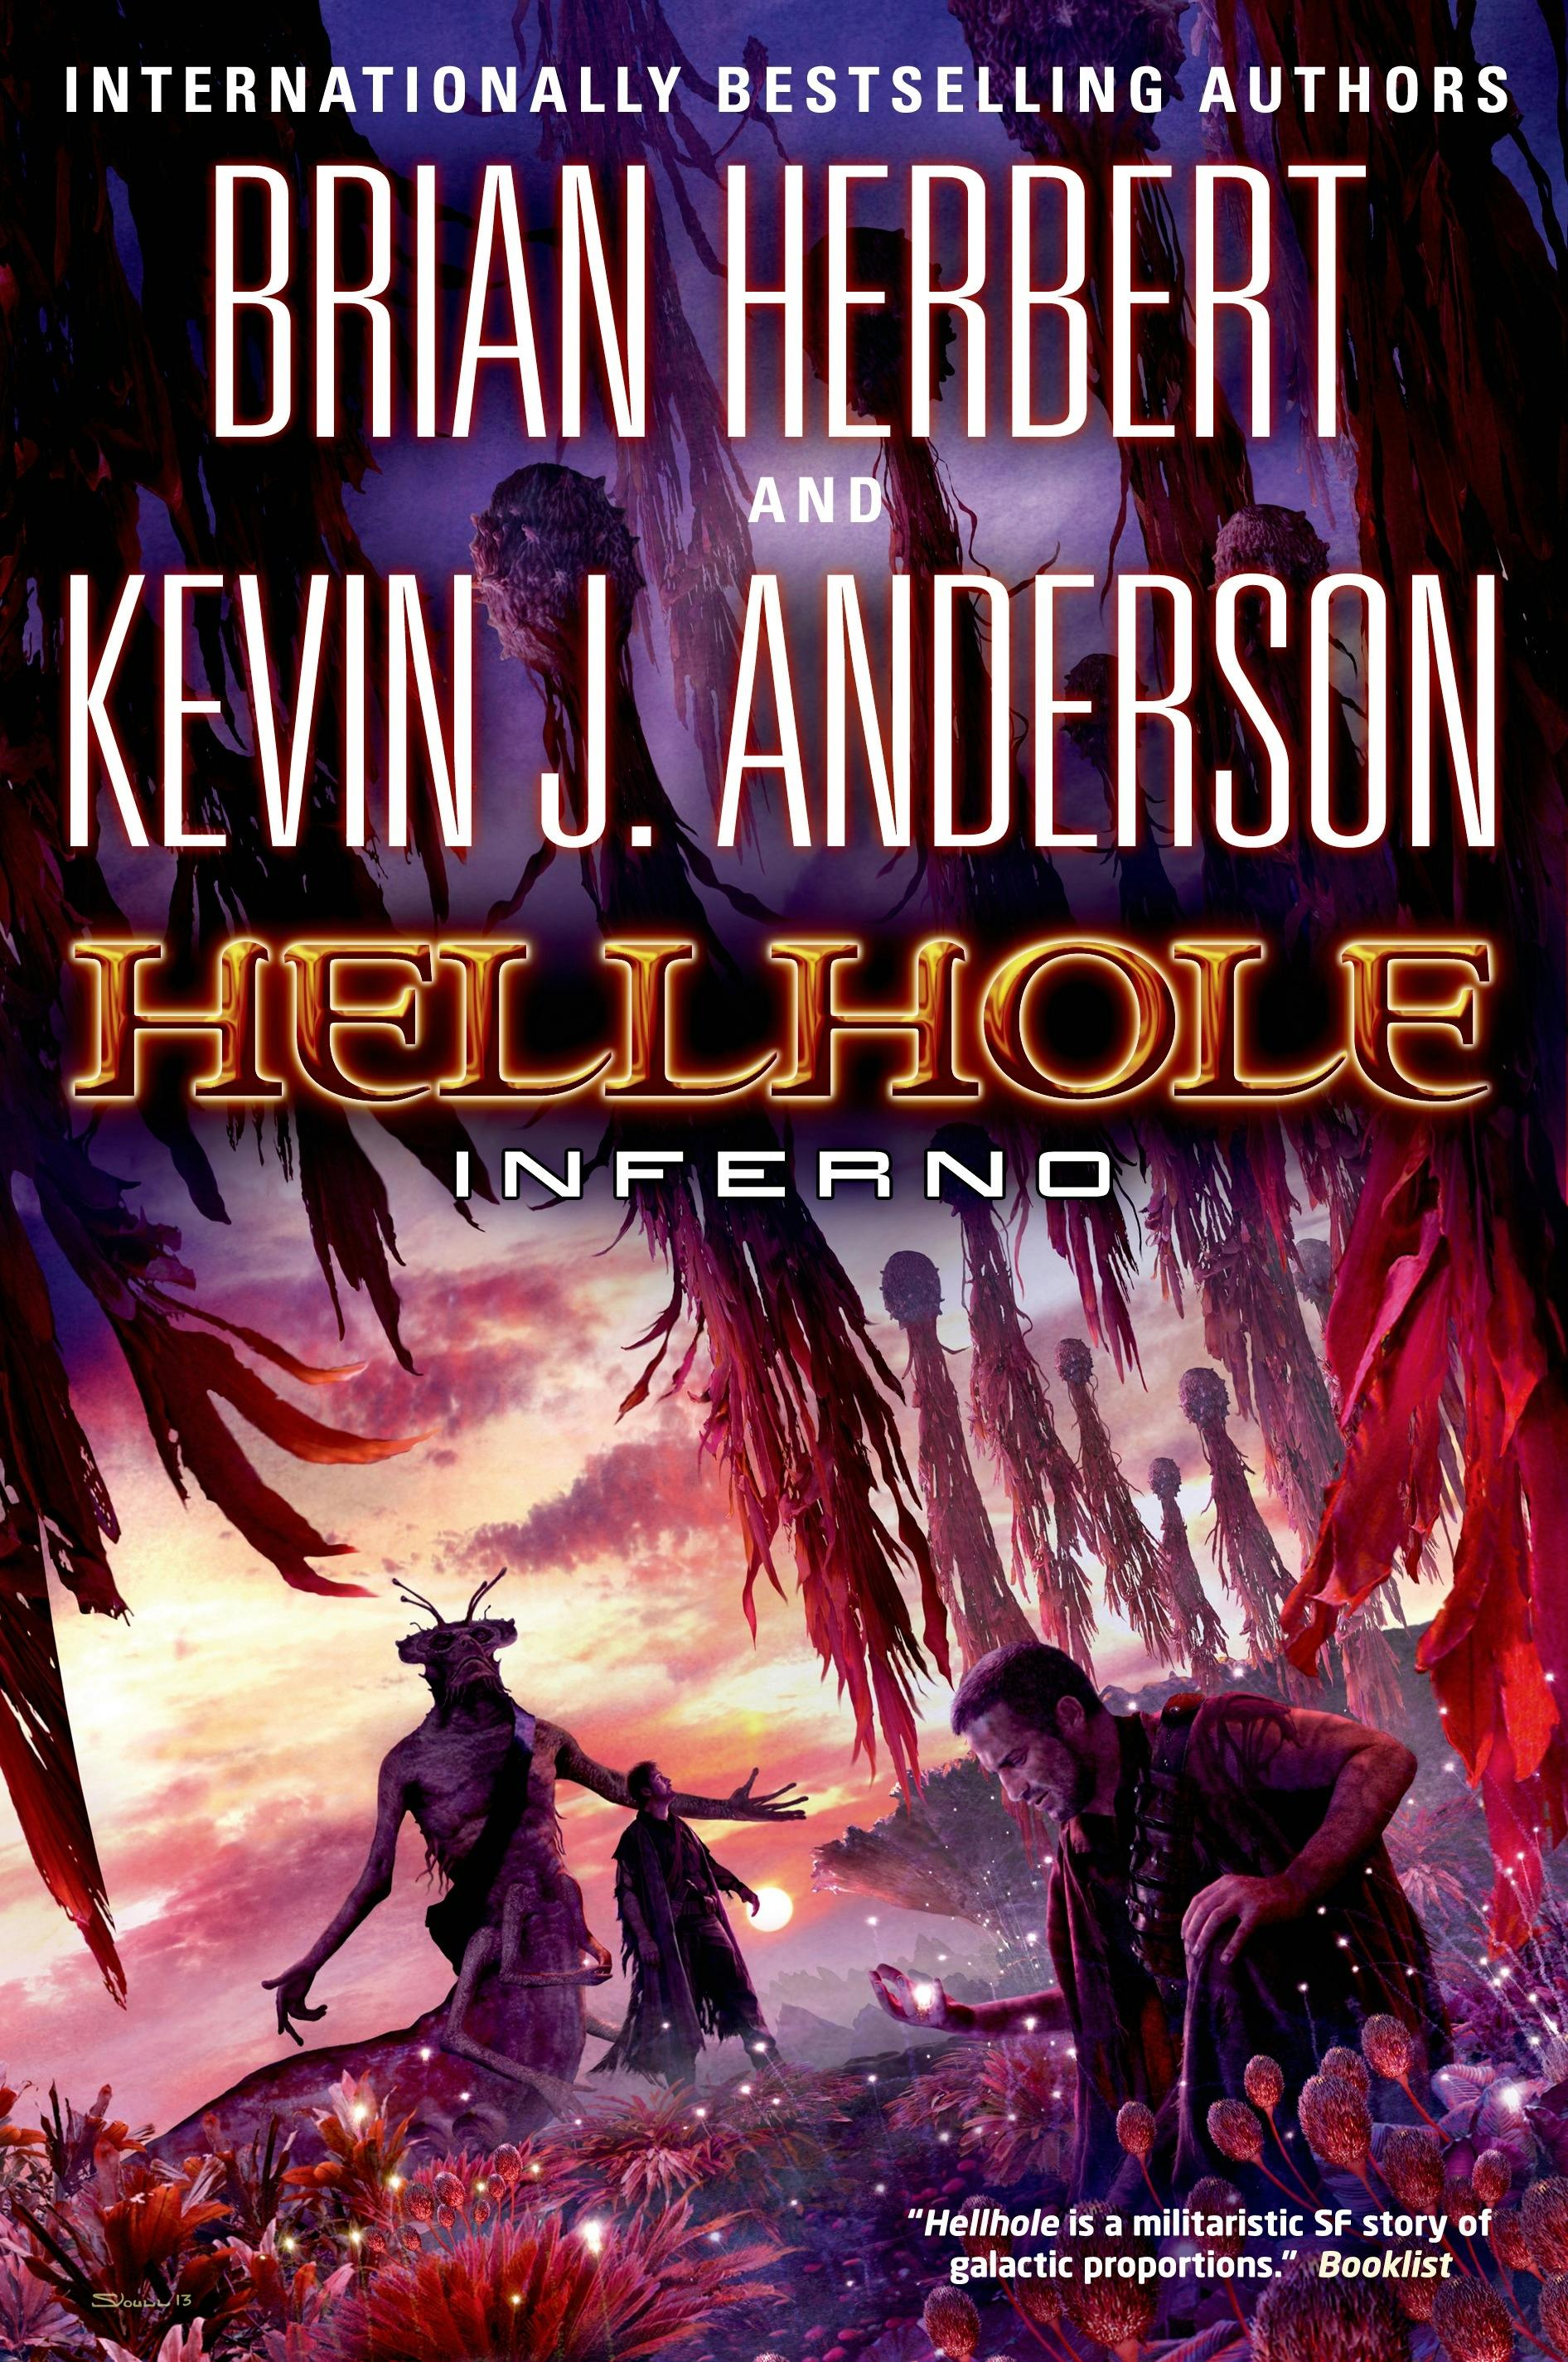 Cover for the book titled as: Hellhole Inferno